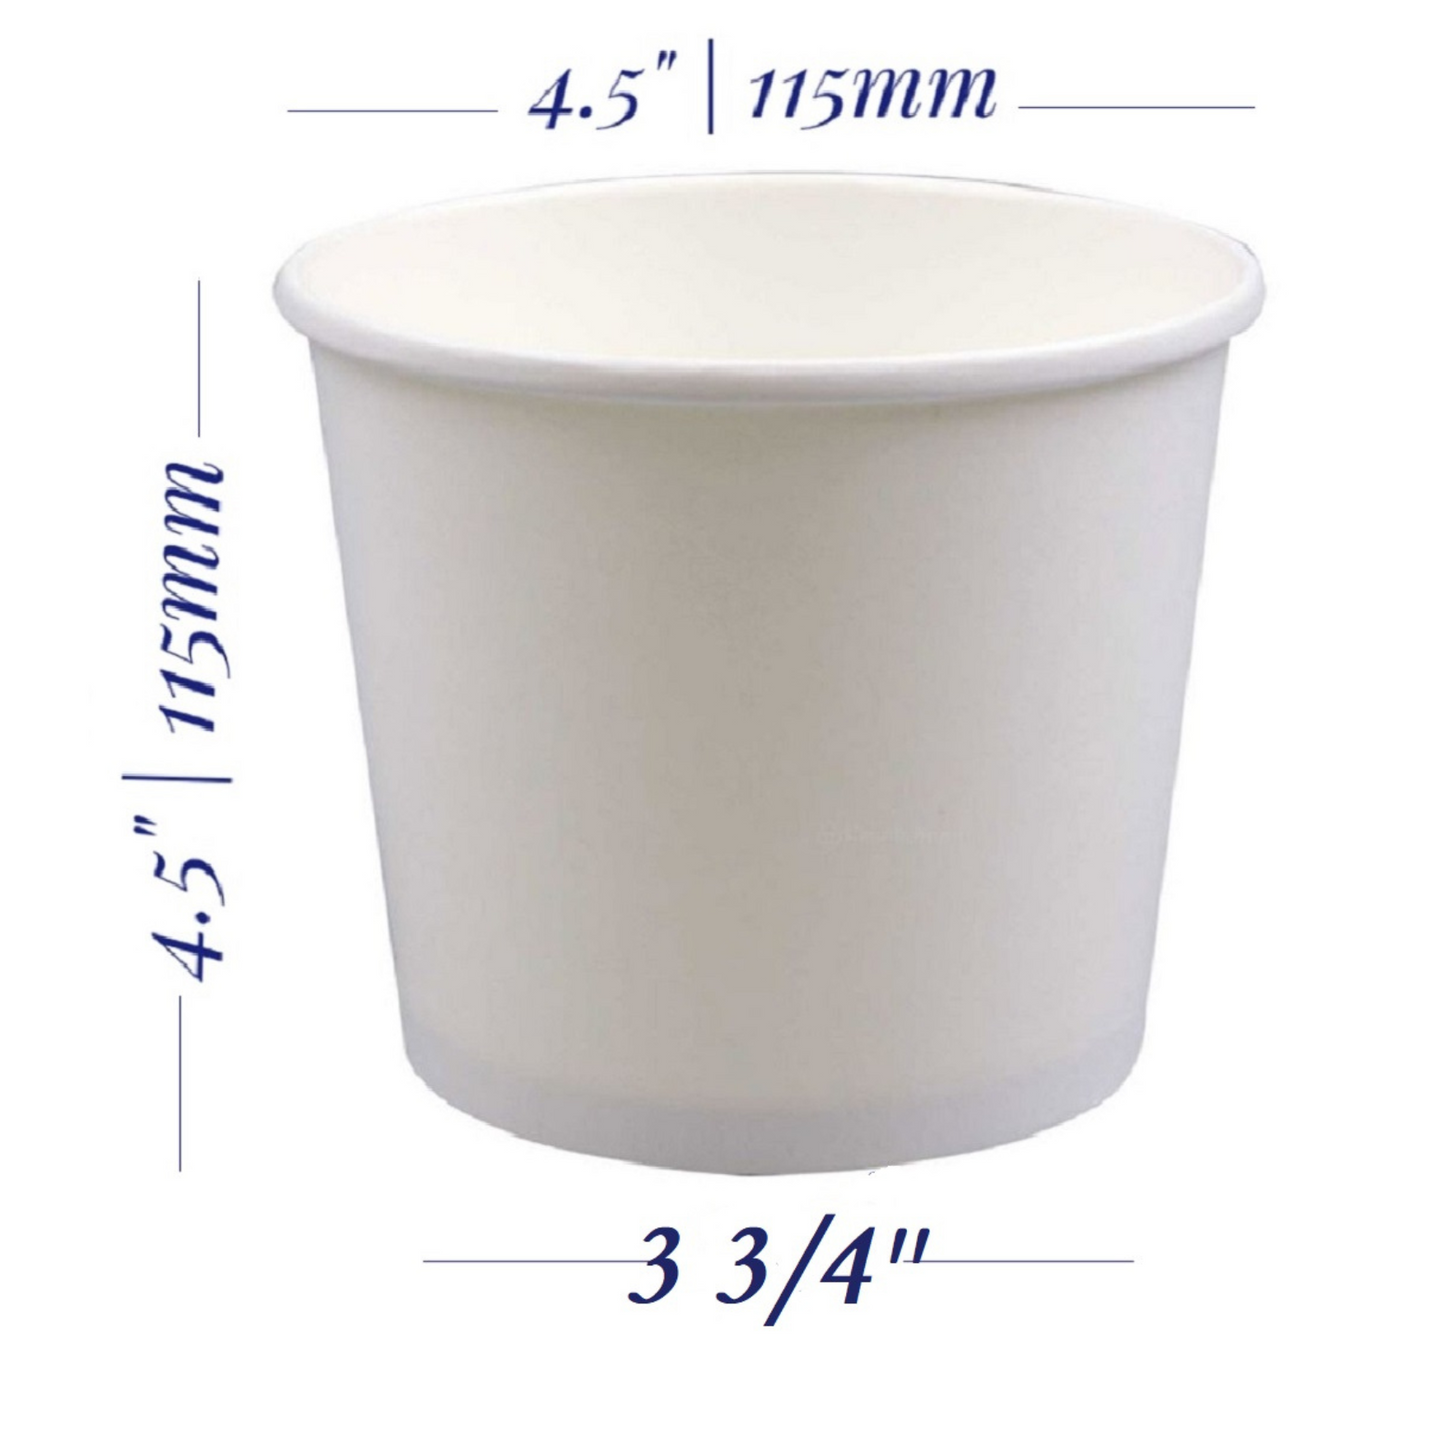 24 Oz Round White Paper Container Wholesale Pricing in Canada (Case of 500)